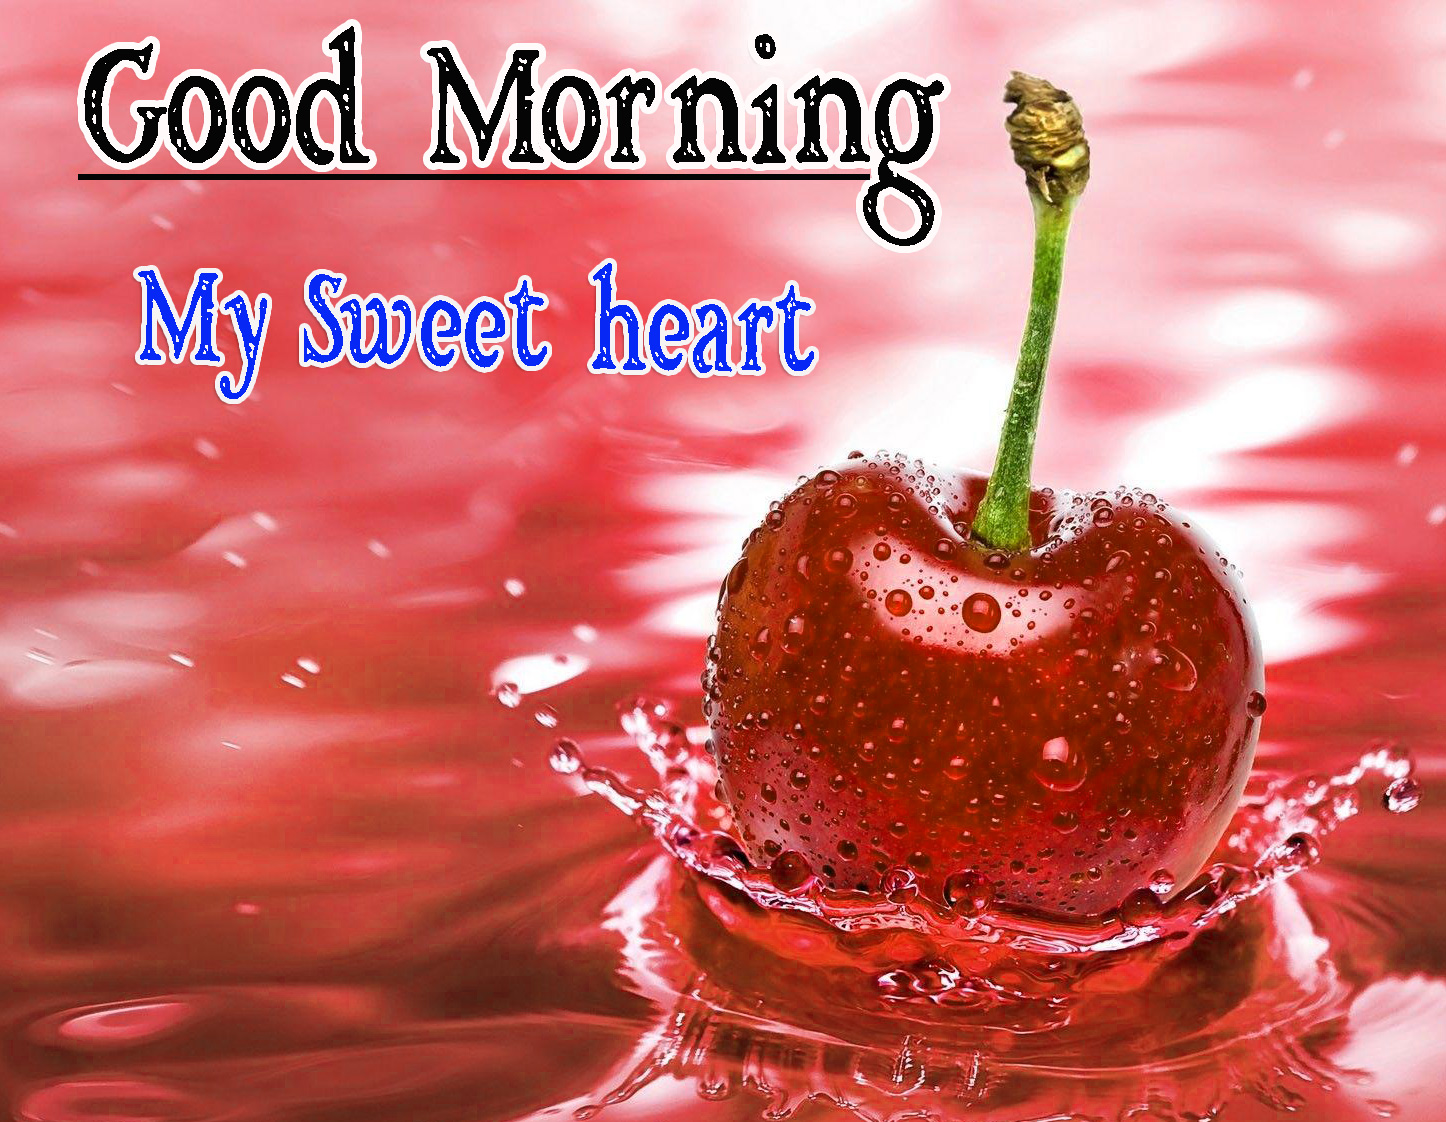 1080p Very Good Morning Images Wallpaper Download Free 